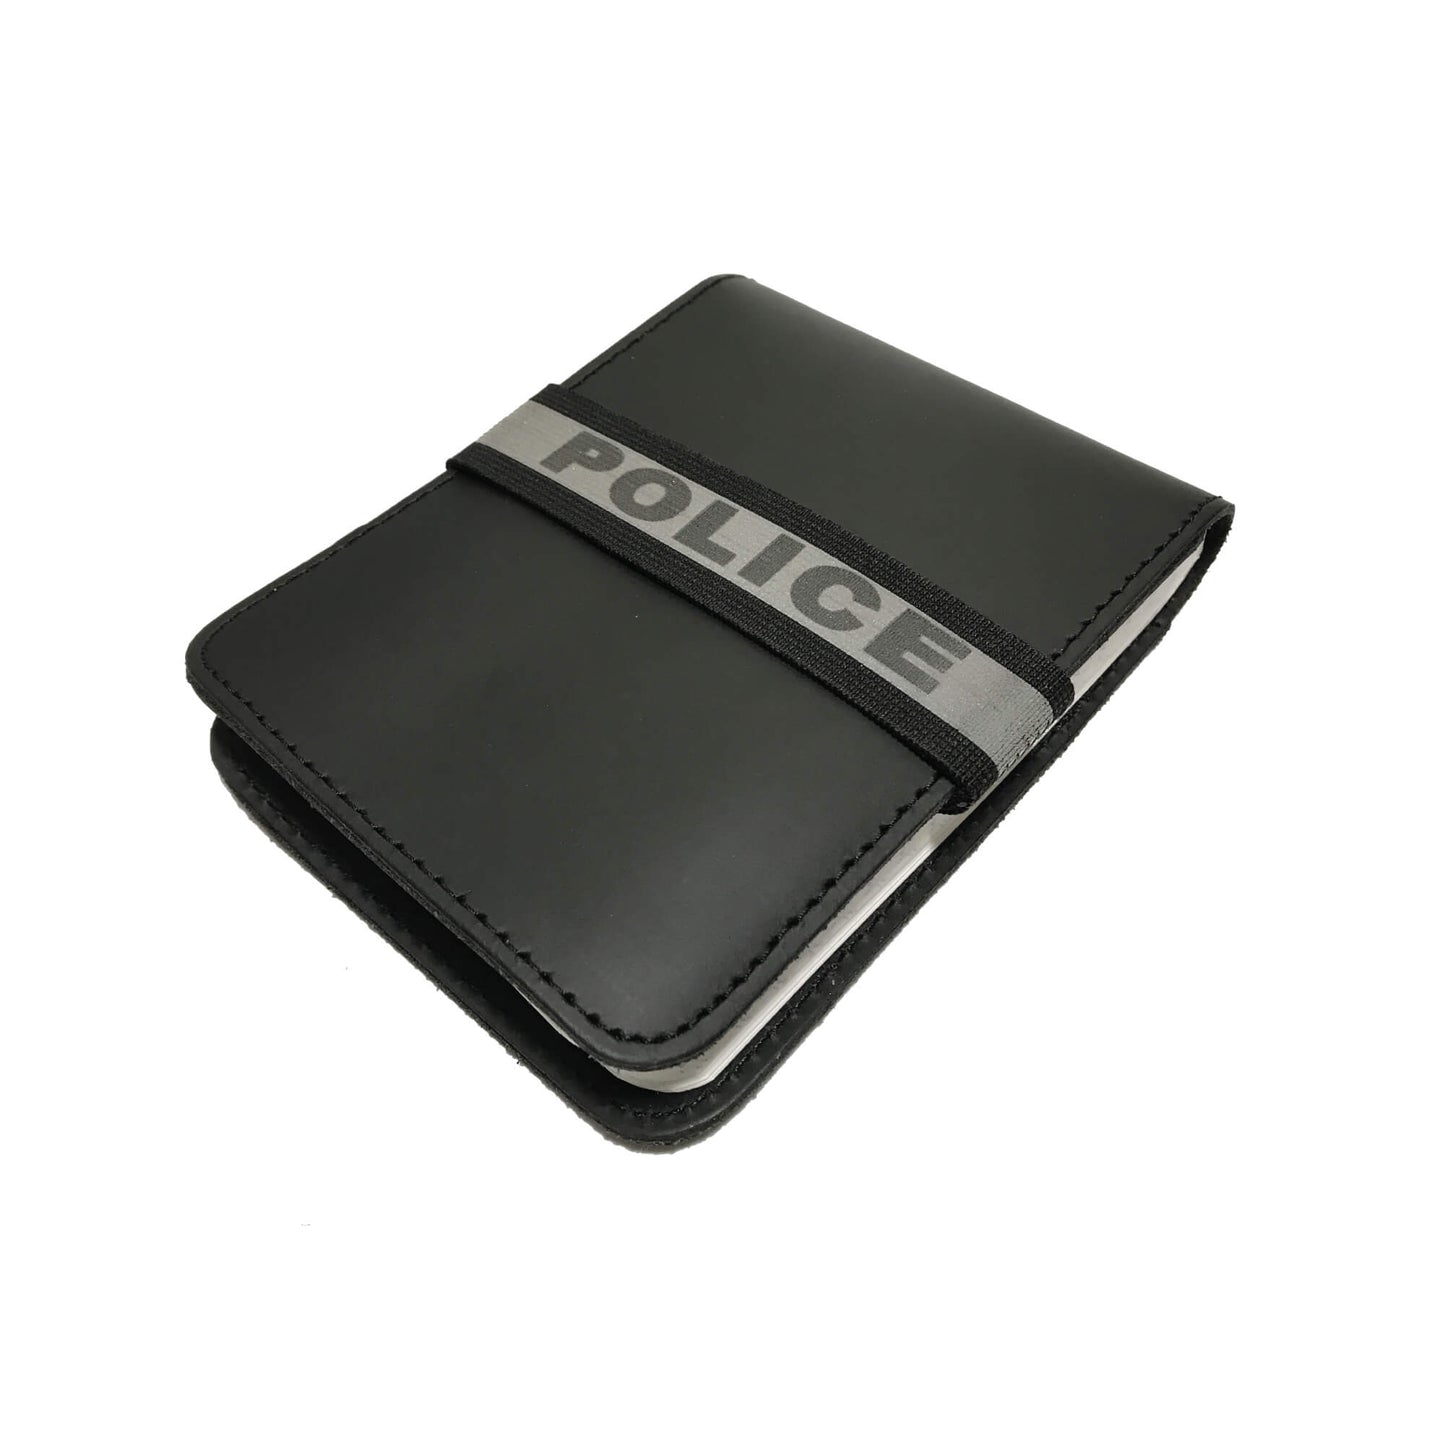 Halifax Regional Police Notebook Cover-Perfect Fit-911 Duty Gear Canada